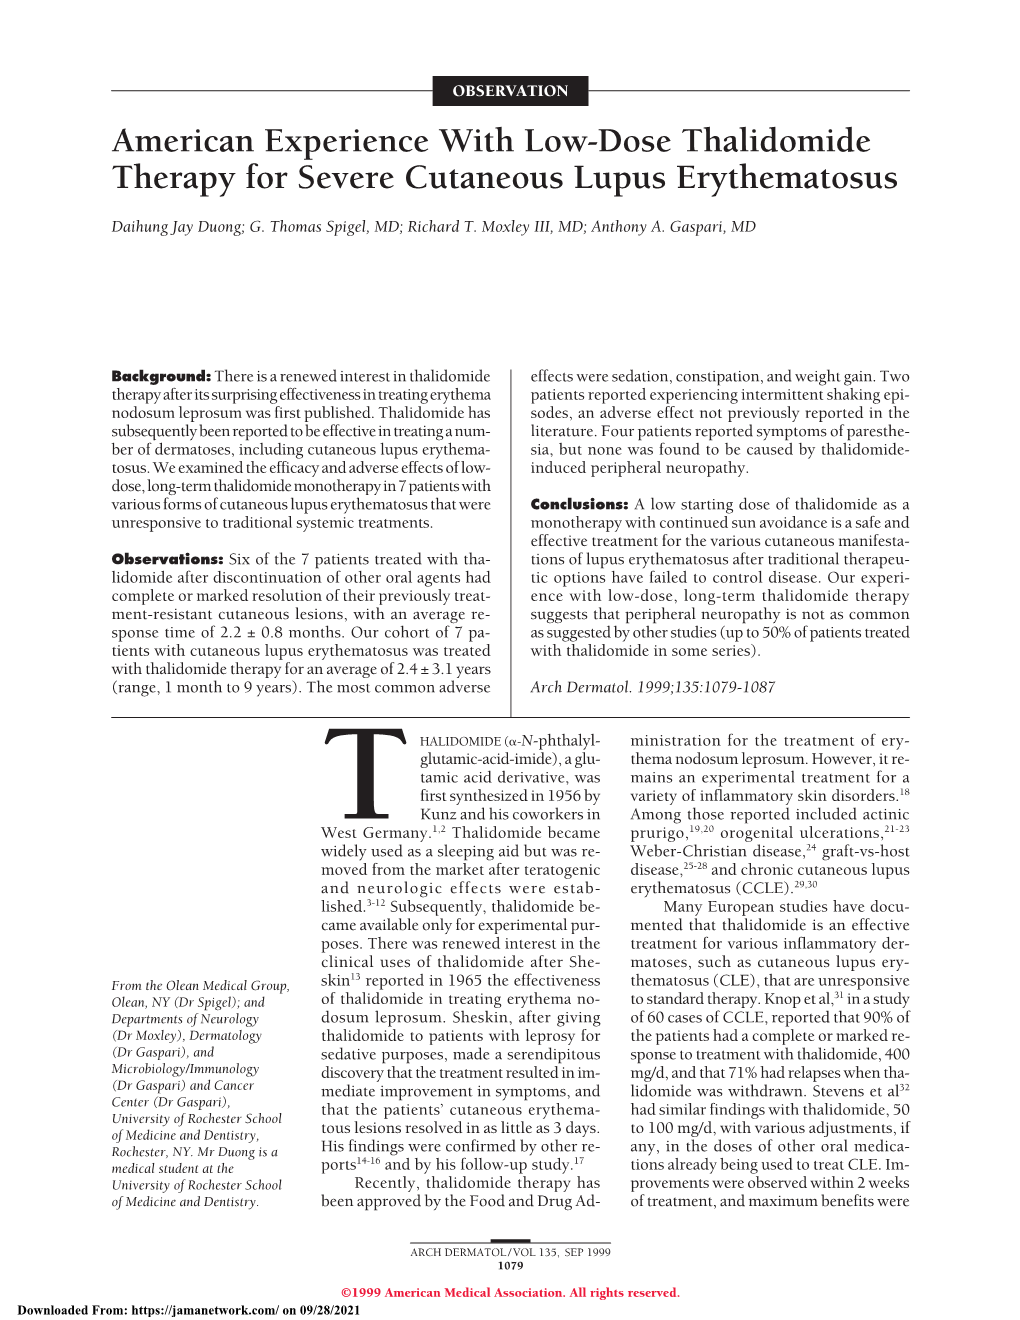 American Experience with Low-Dose Thalidomide Therapy for Severe Cutaneous Lupus Erythematosus